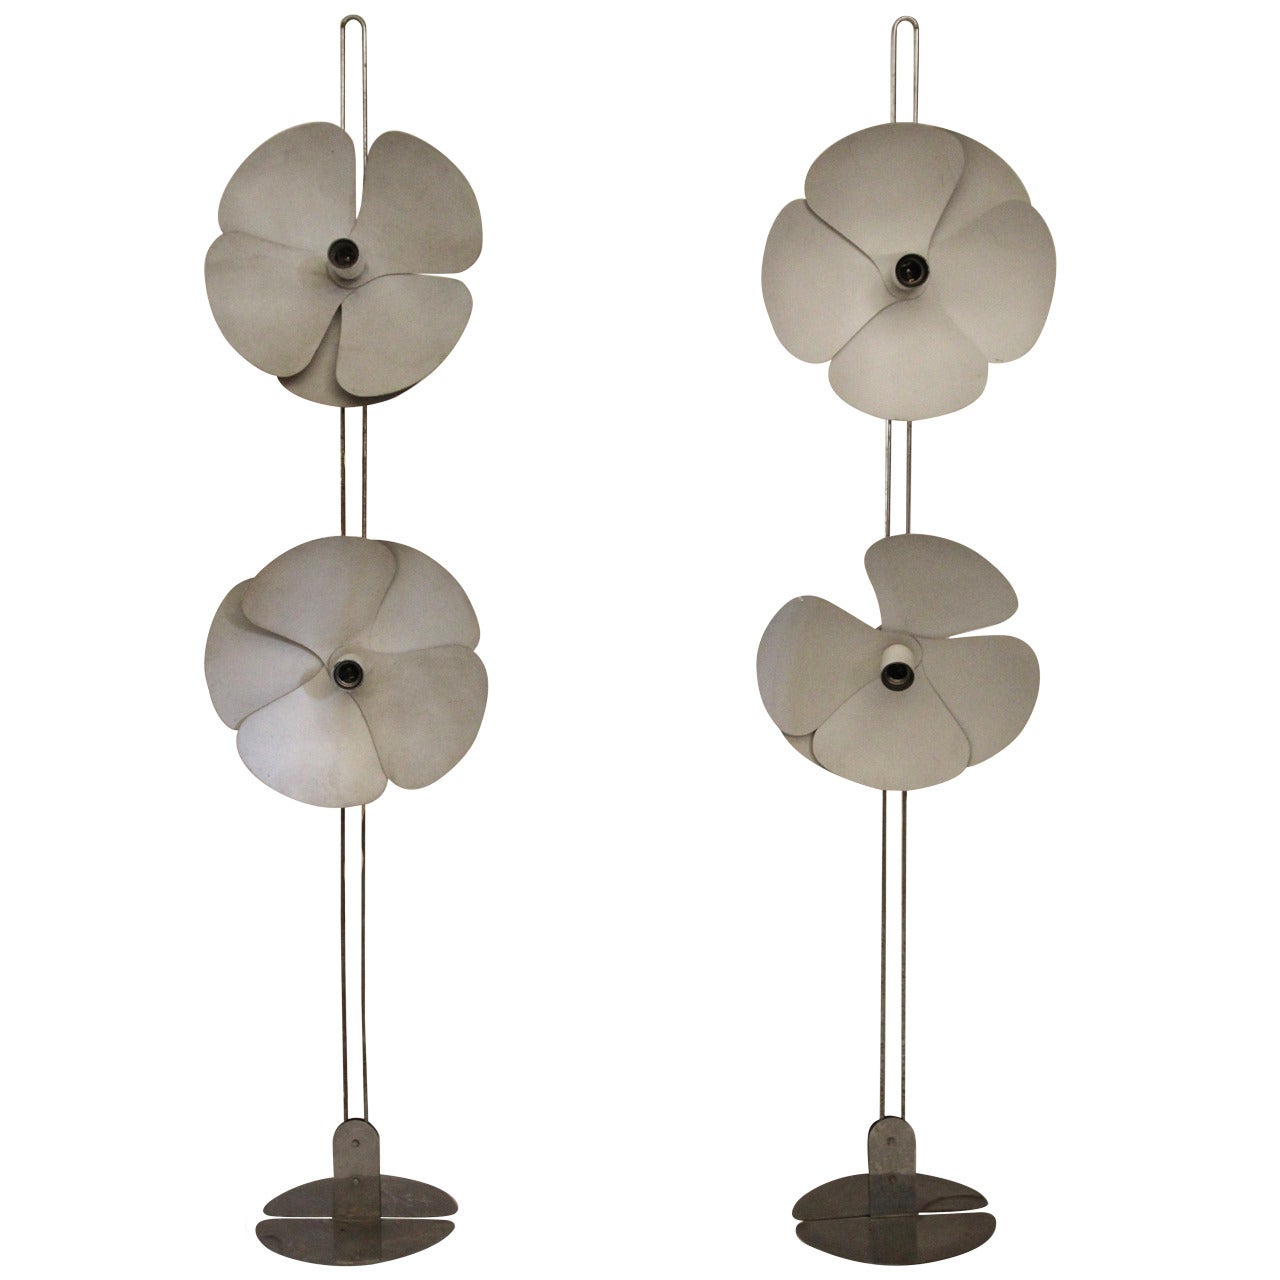 Olivier Mourgue Pair of "Flower" Floor Lamps, circa 1970 France